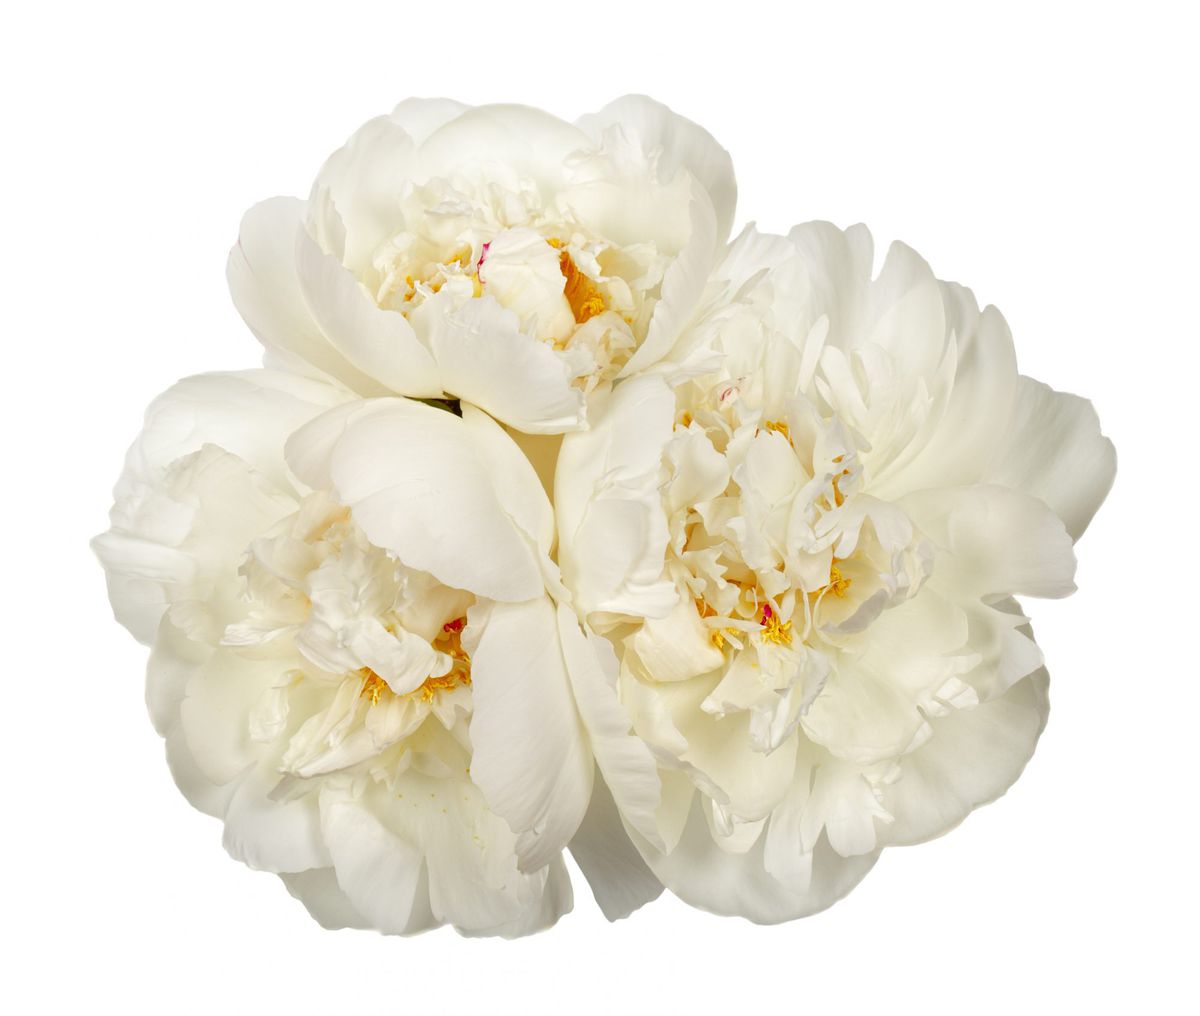 Peonies initially were grown for medicinal purposes